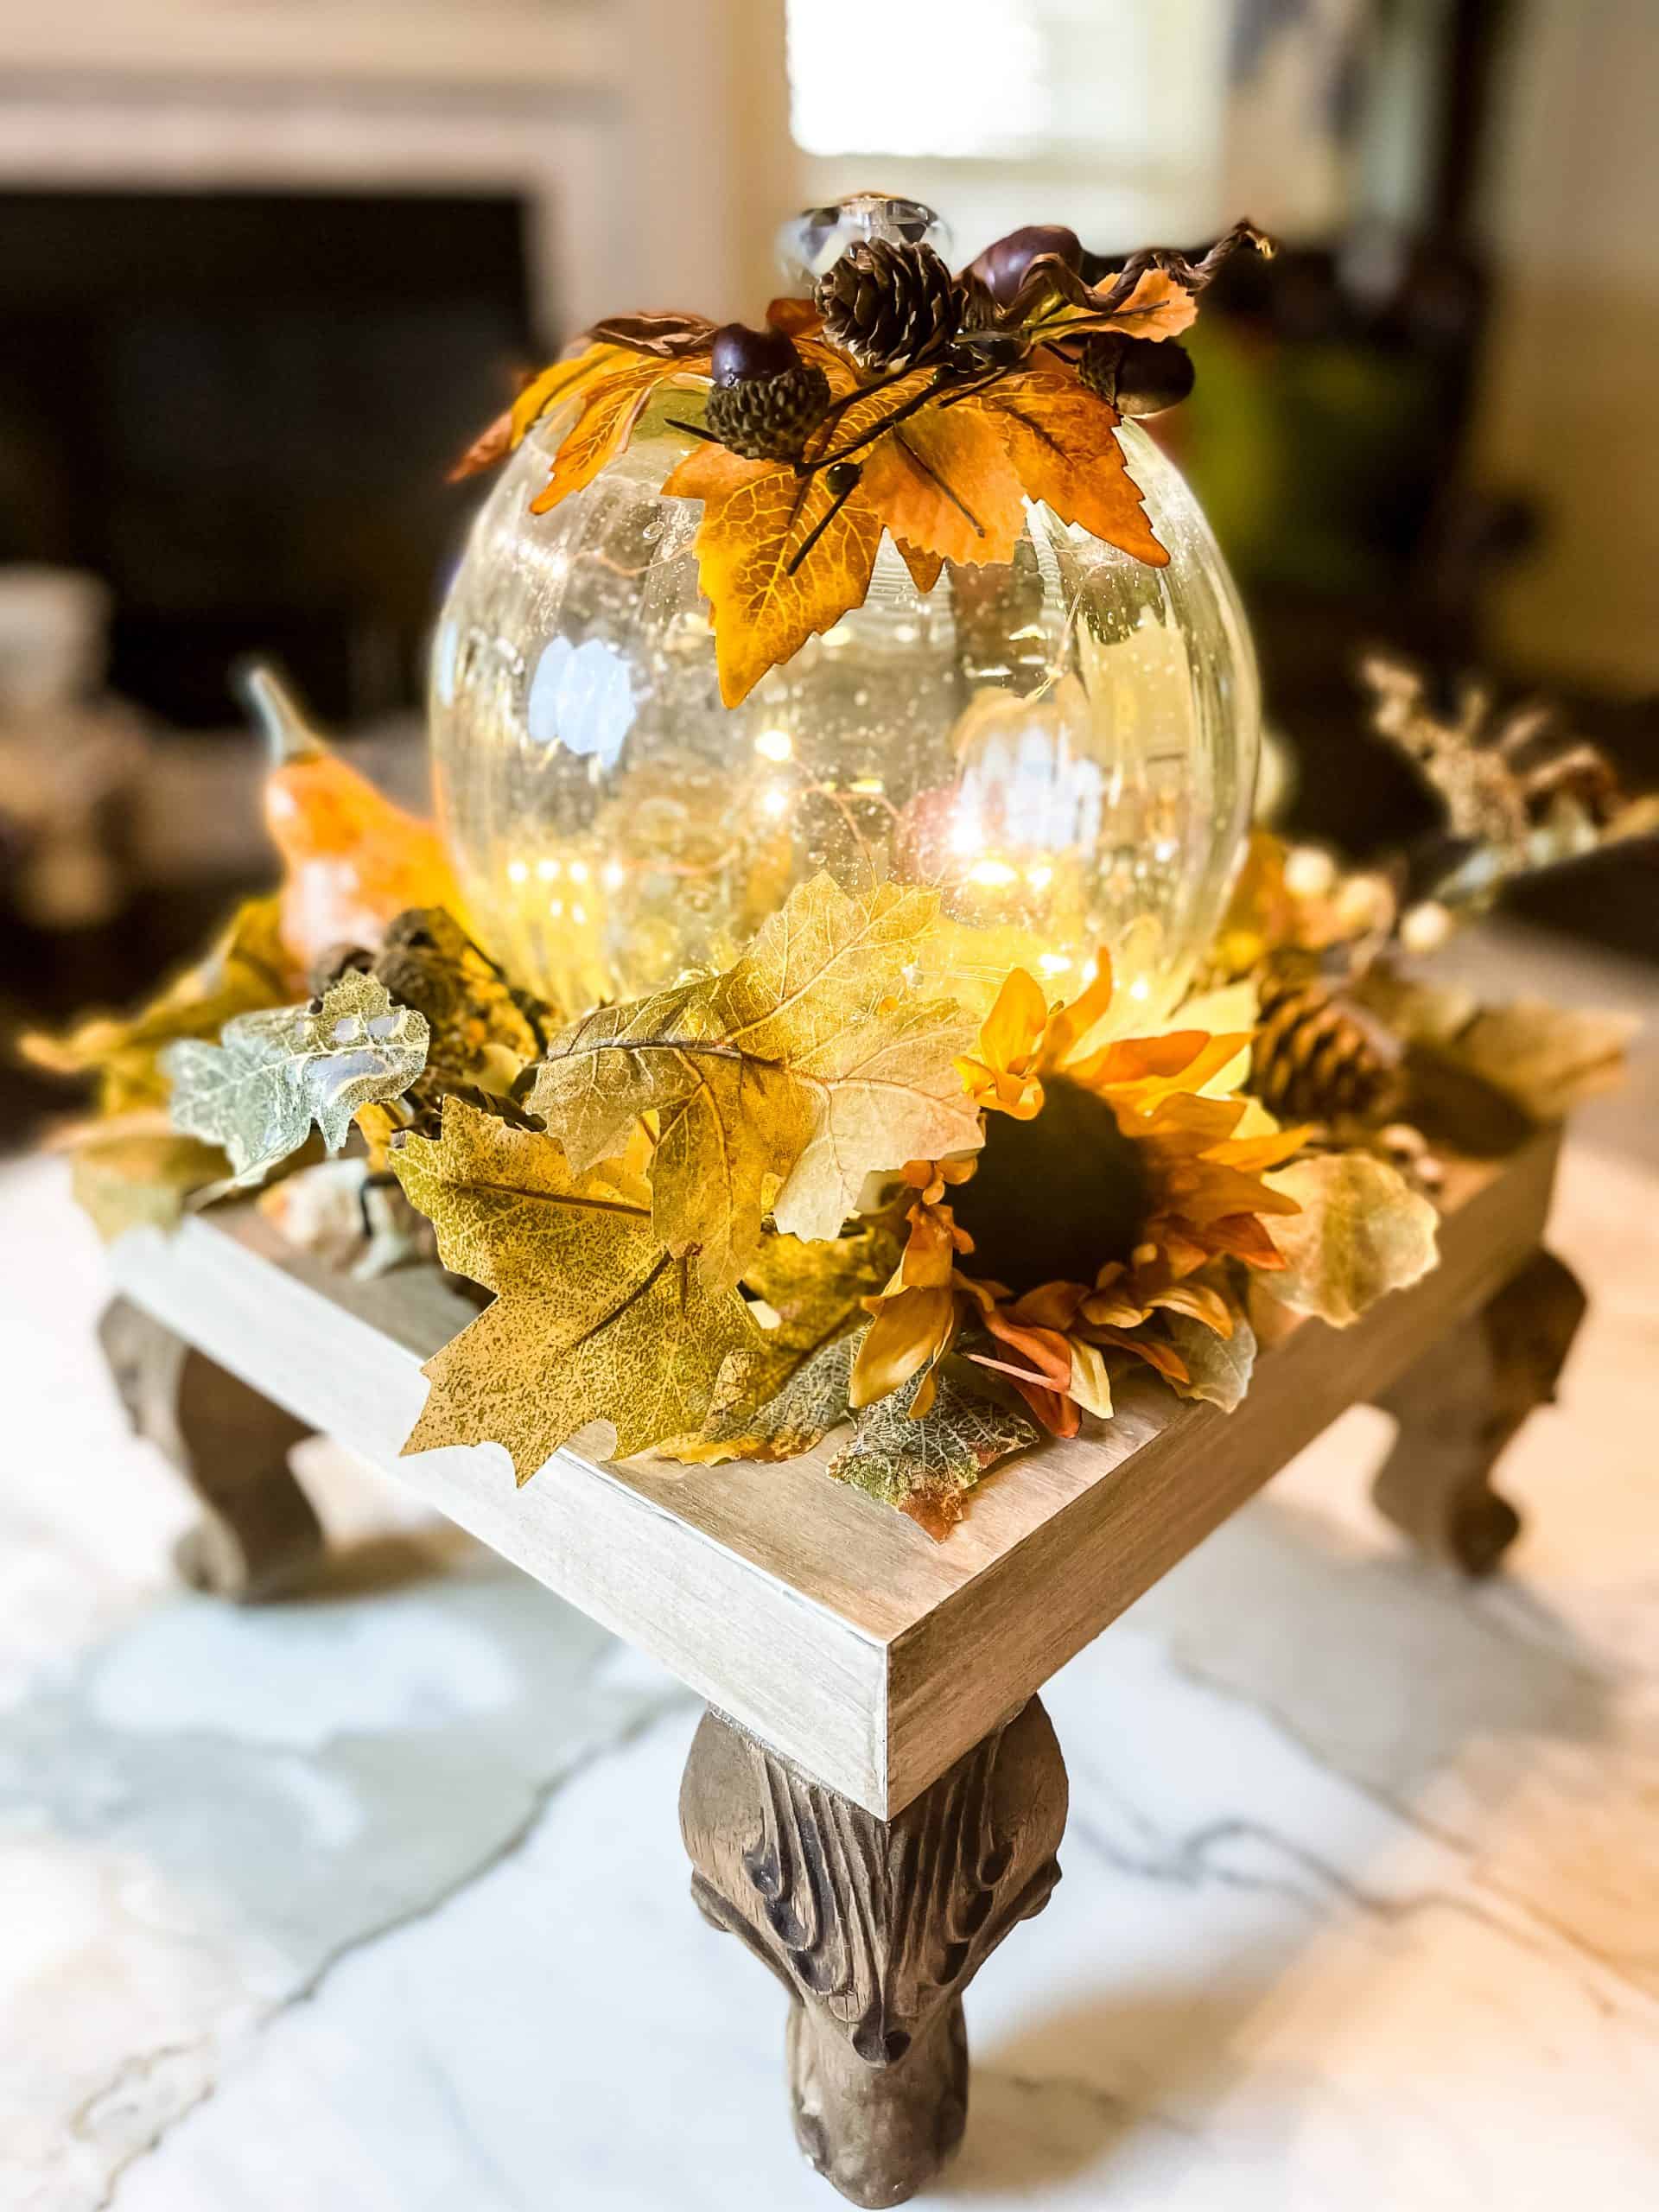 How to Make a Glass Pumpkin DIY from a Round Vase